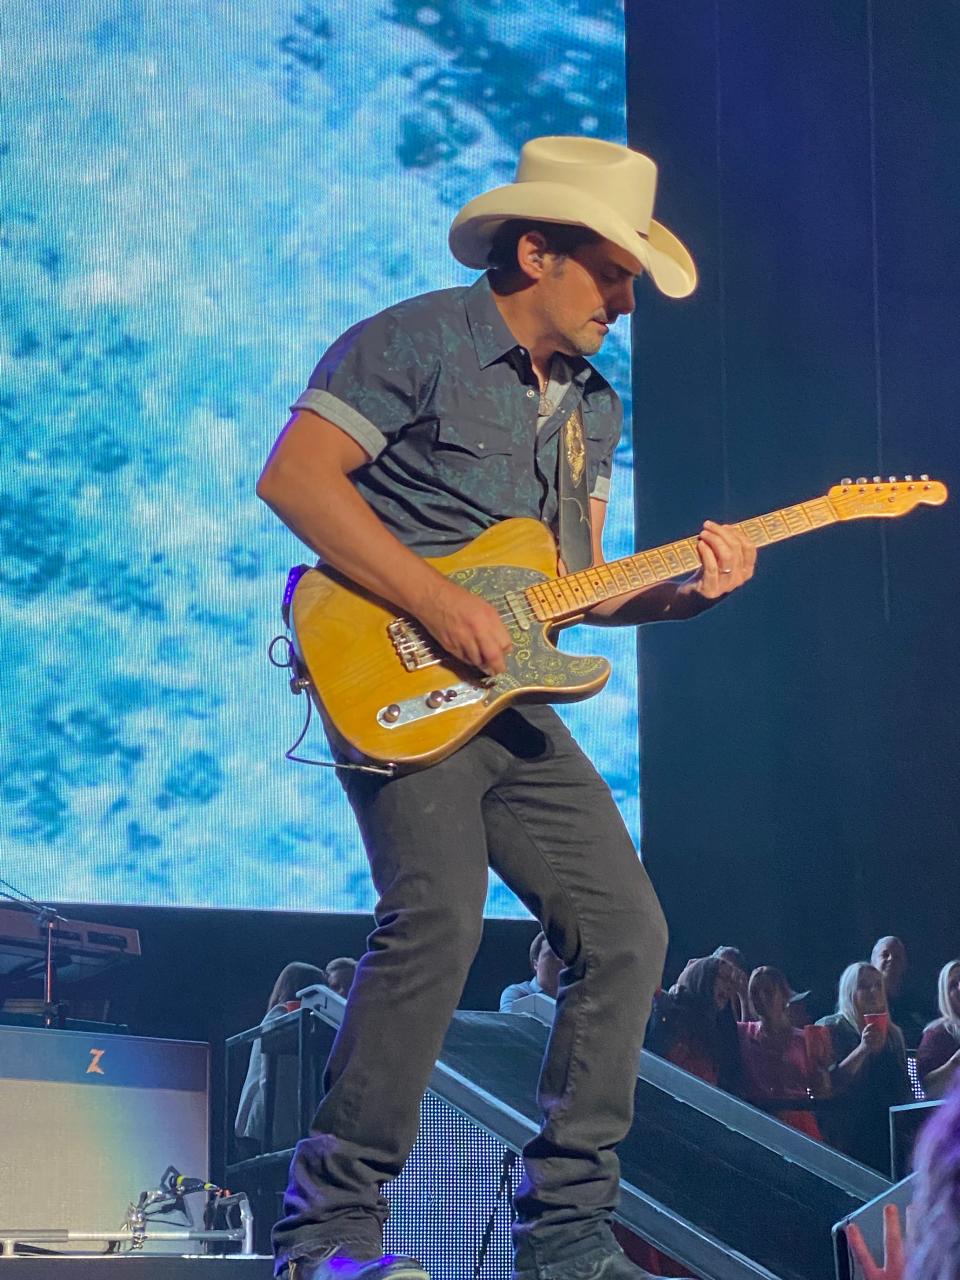 Brad Paisley, known for his singing, songwriting and his guitar play, will be one of the two concerts at The American Express PGA Tour event in La Quinta in January.